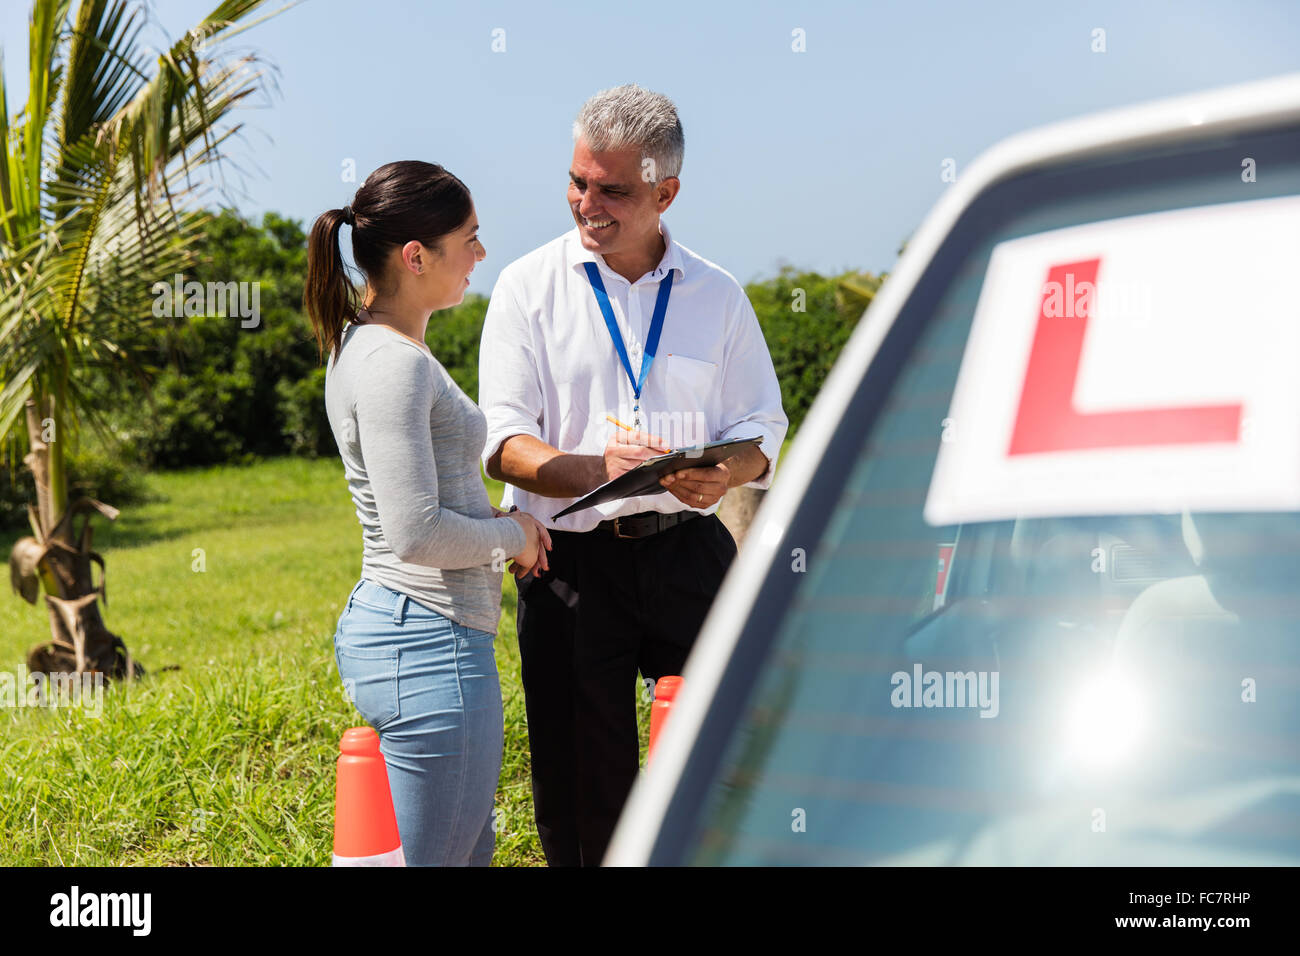 female learner driver and instructor behind a car Stock Photo